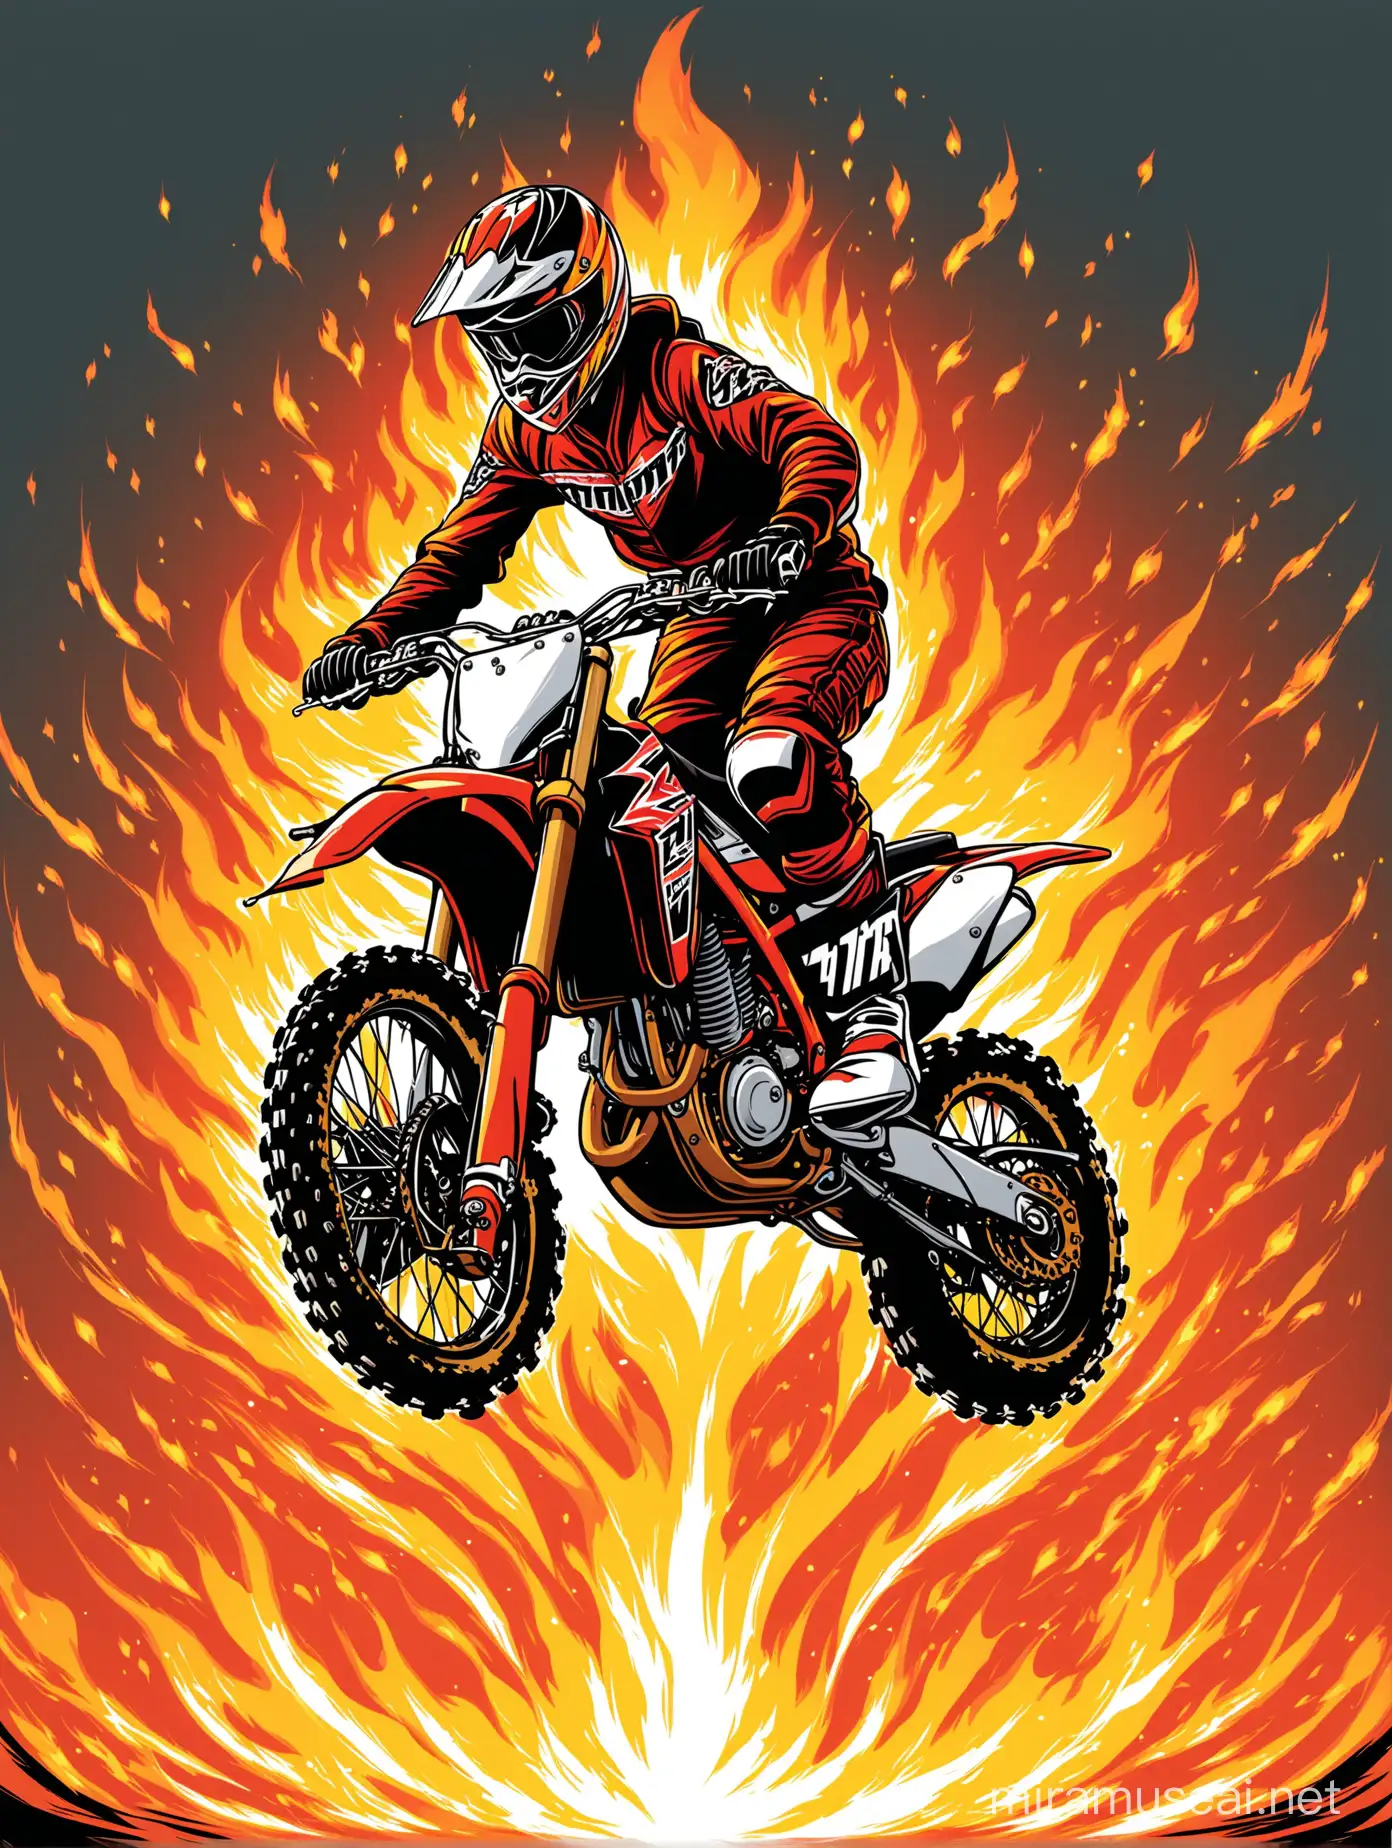 Thrilling Motorcross Jump with Blazing Fire Background Vector Image